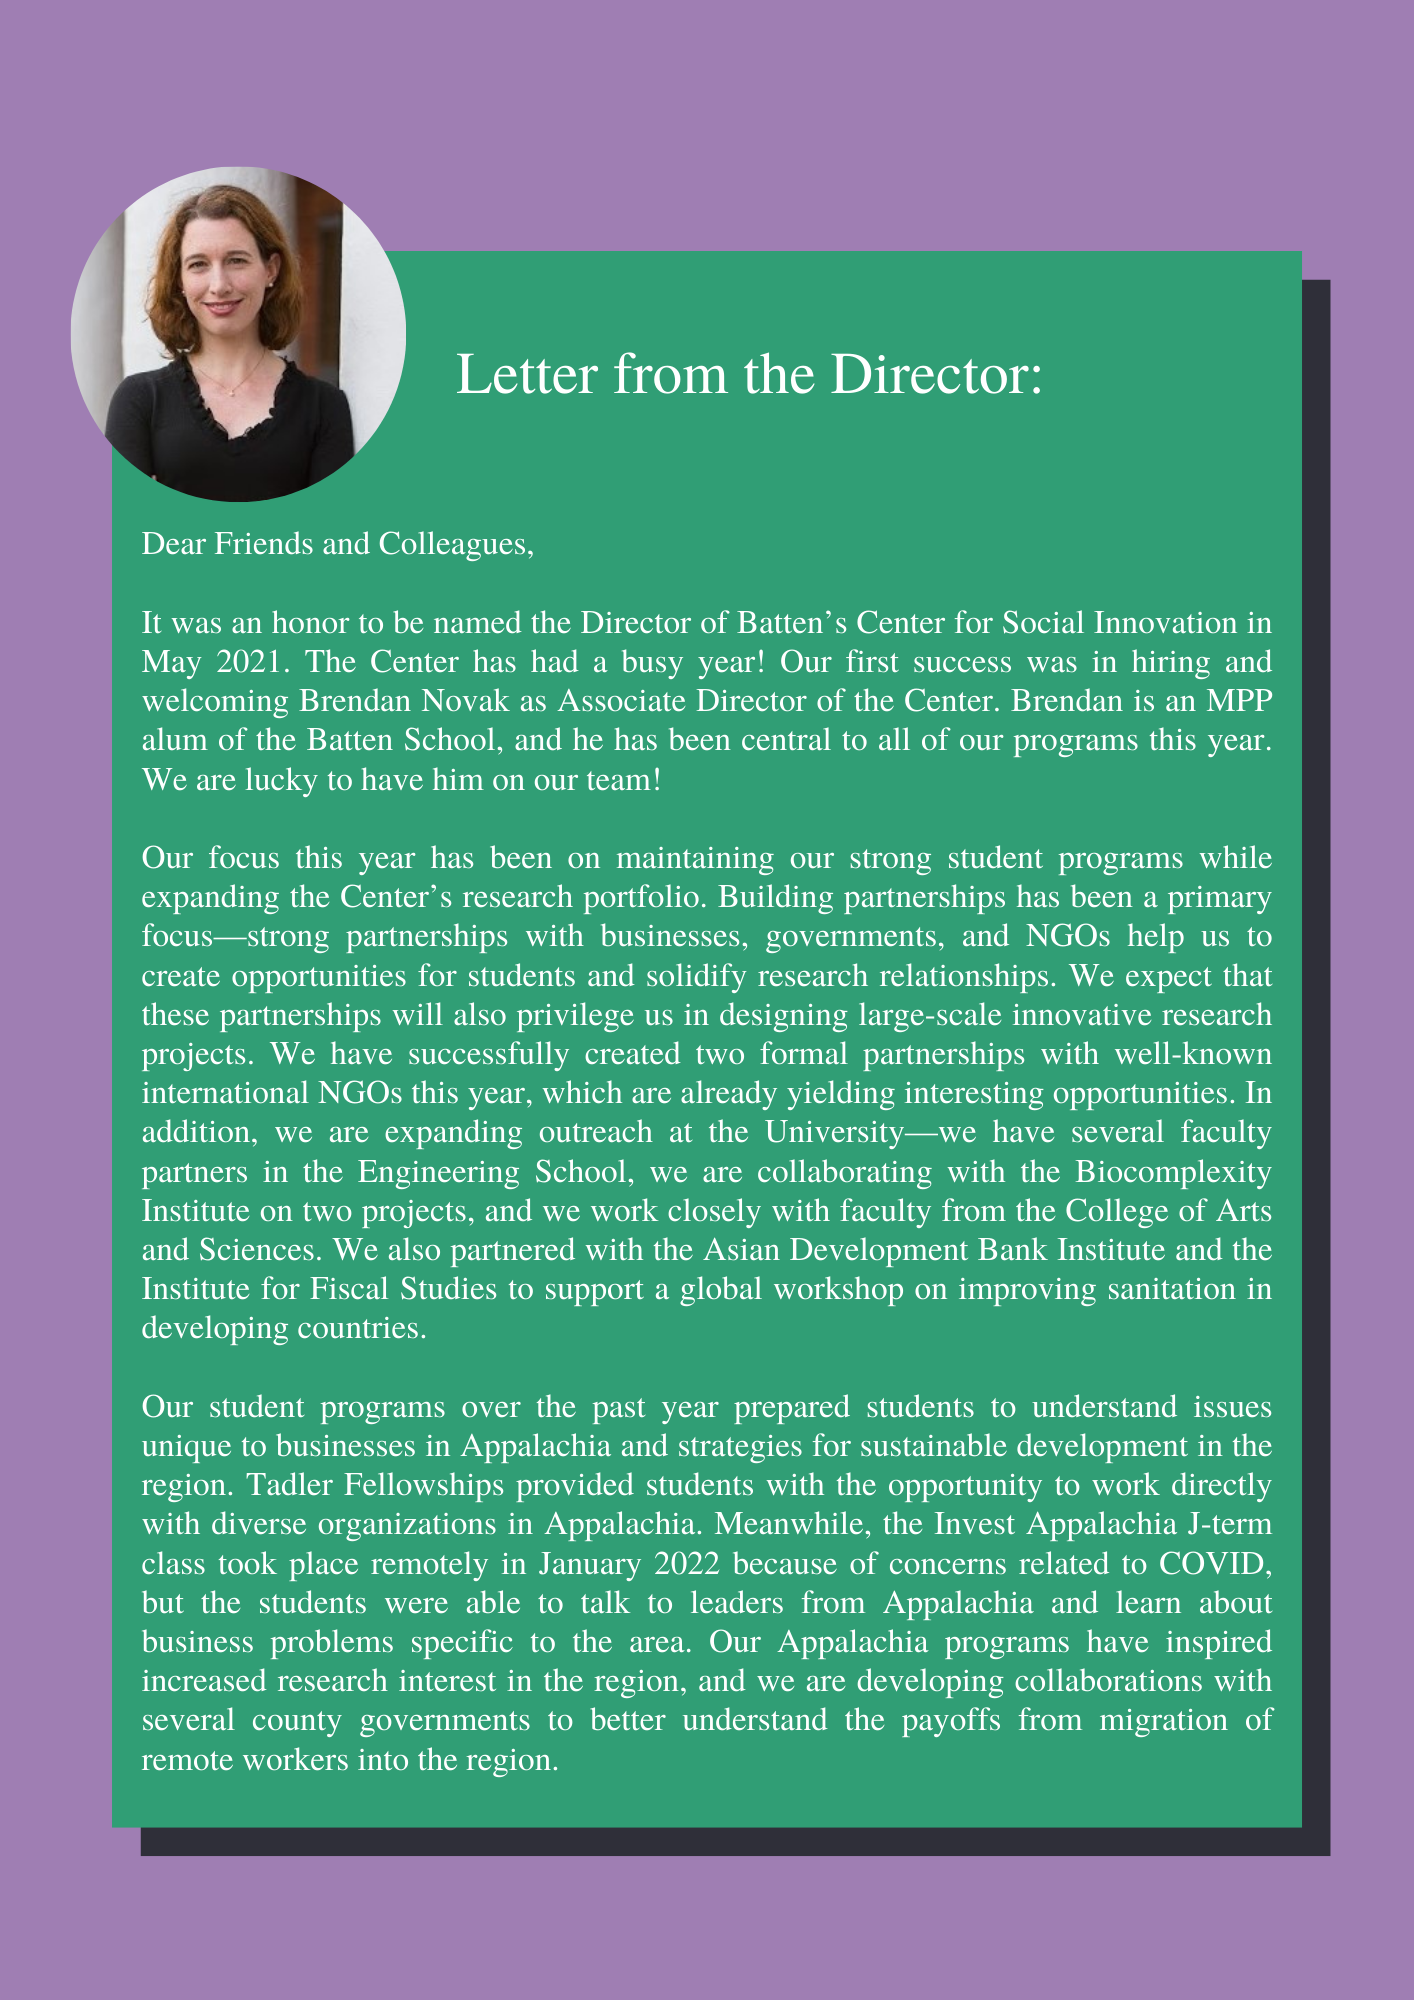 Letter from the Director.png